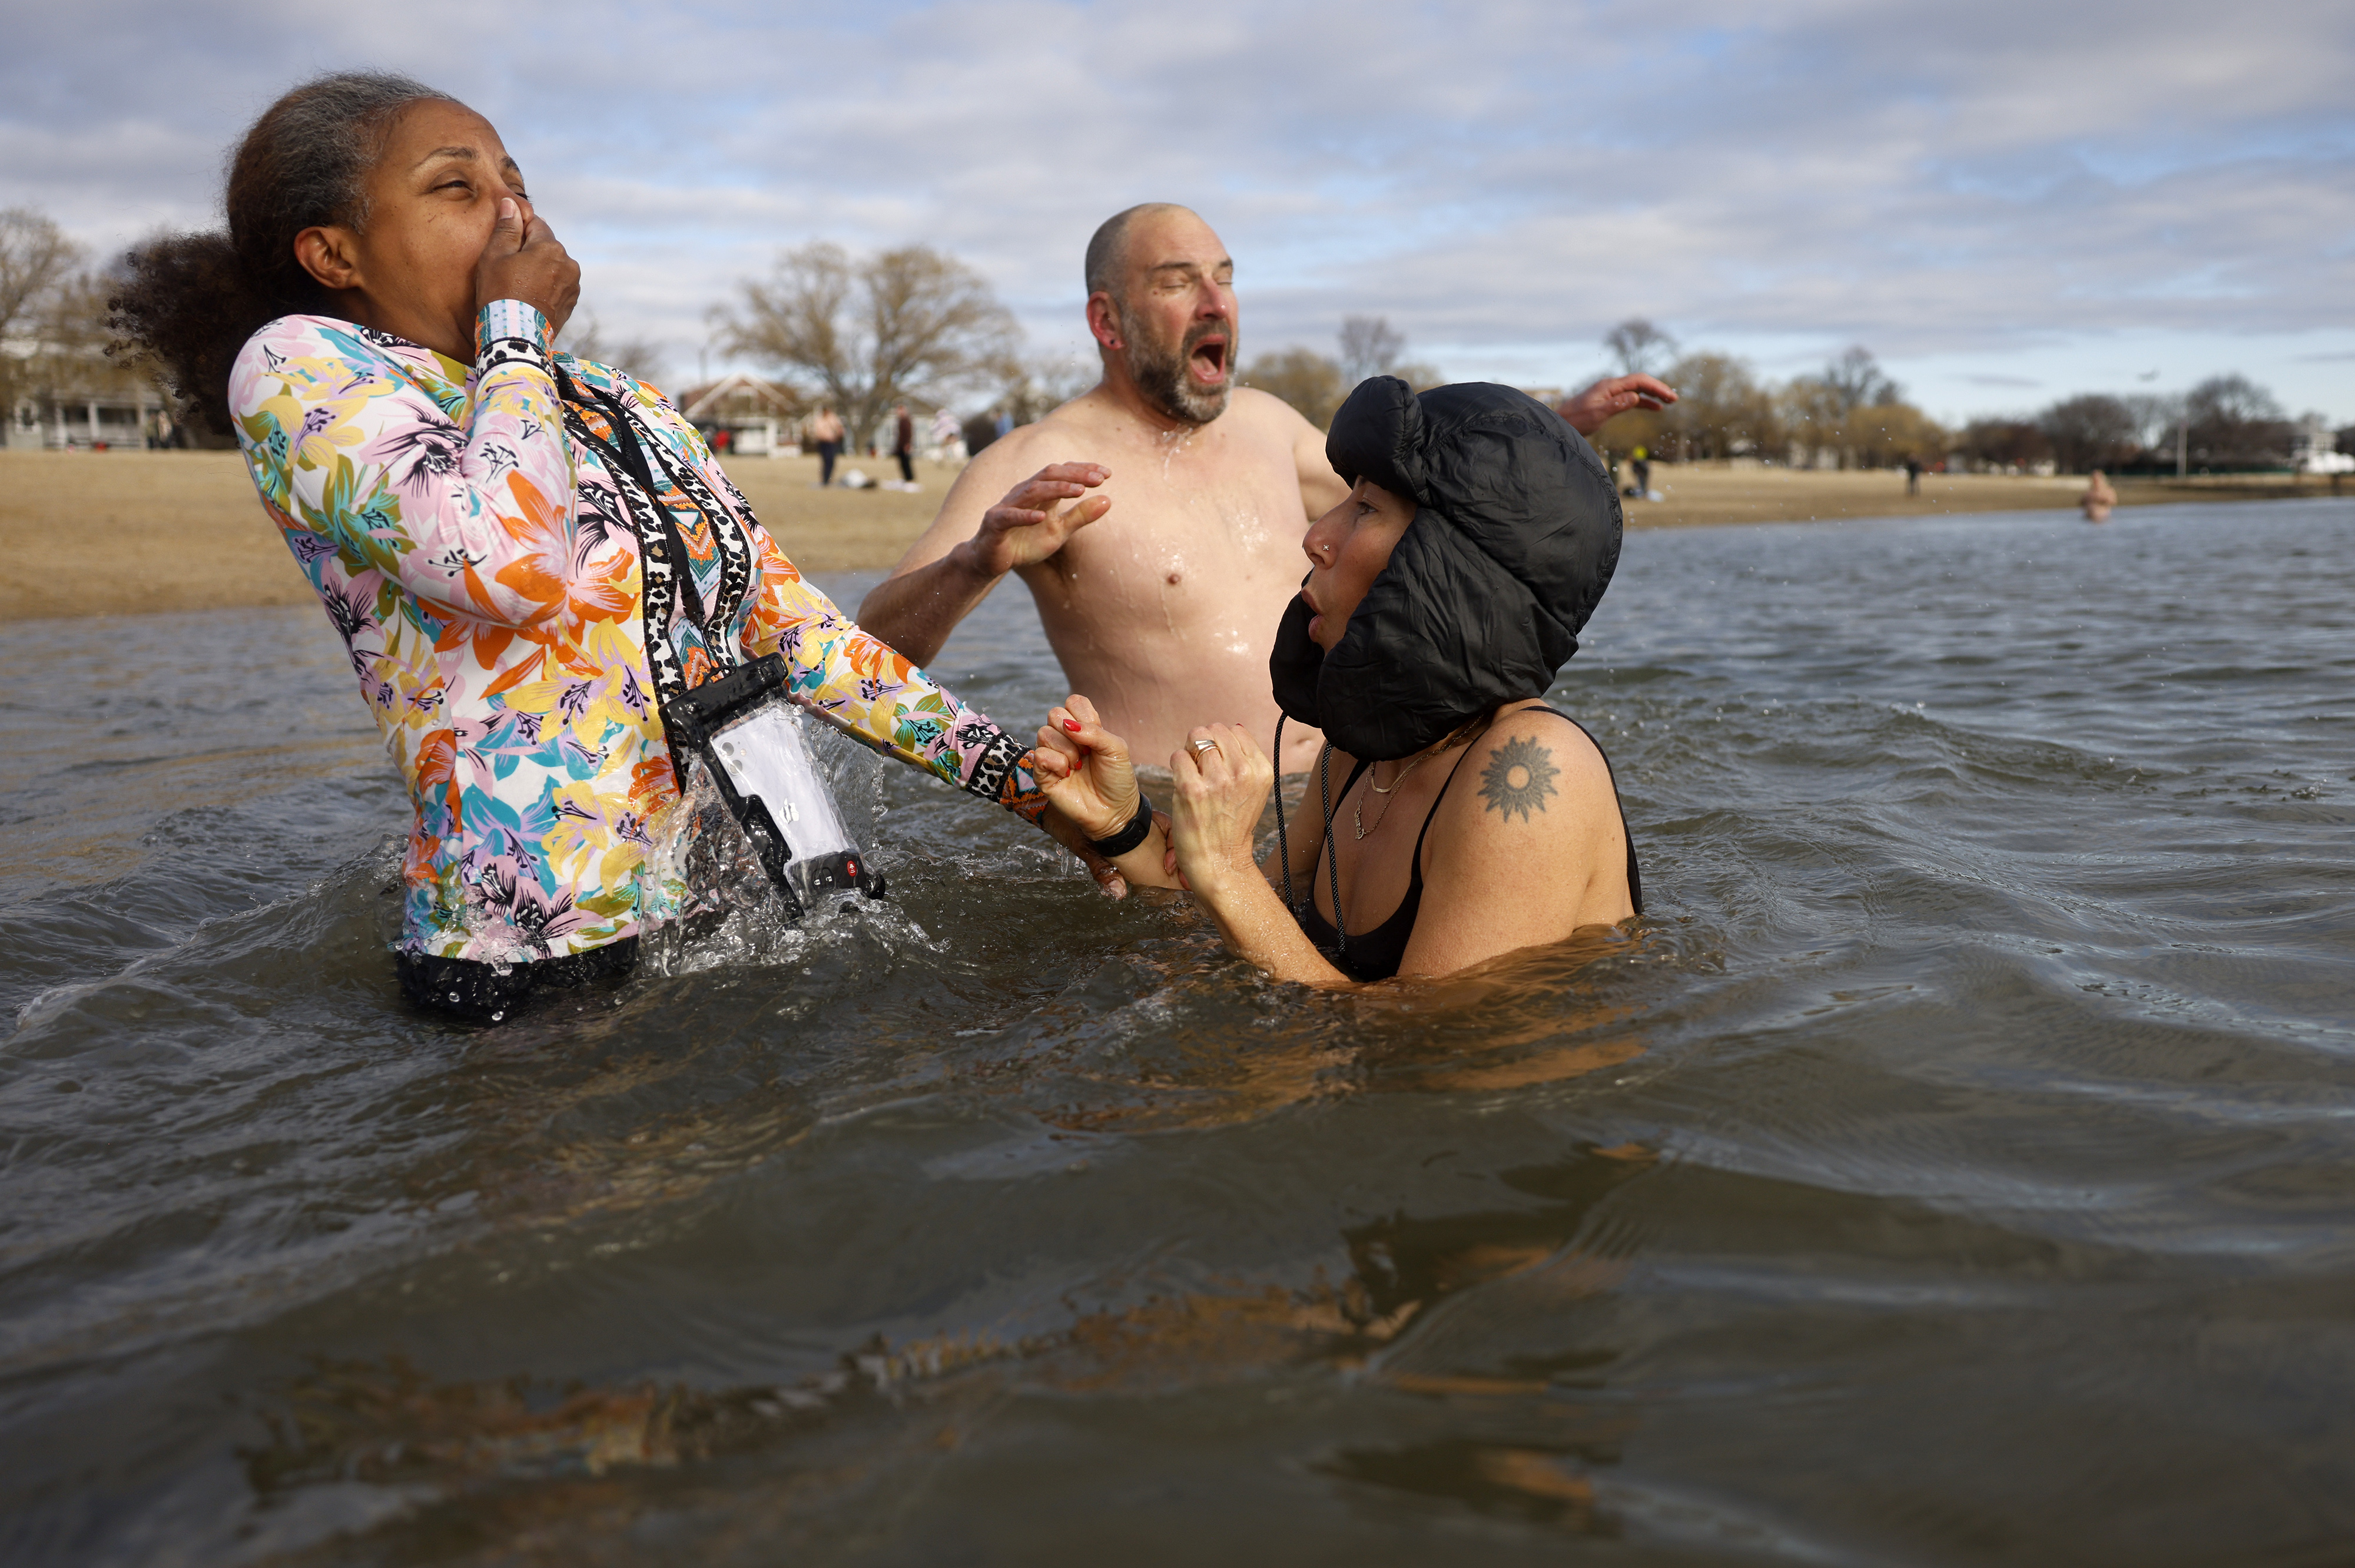 L Street Brownies' chilly swim is an old tradition for New Year's